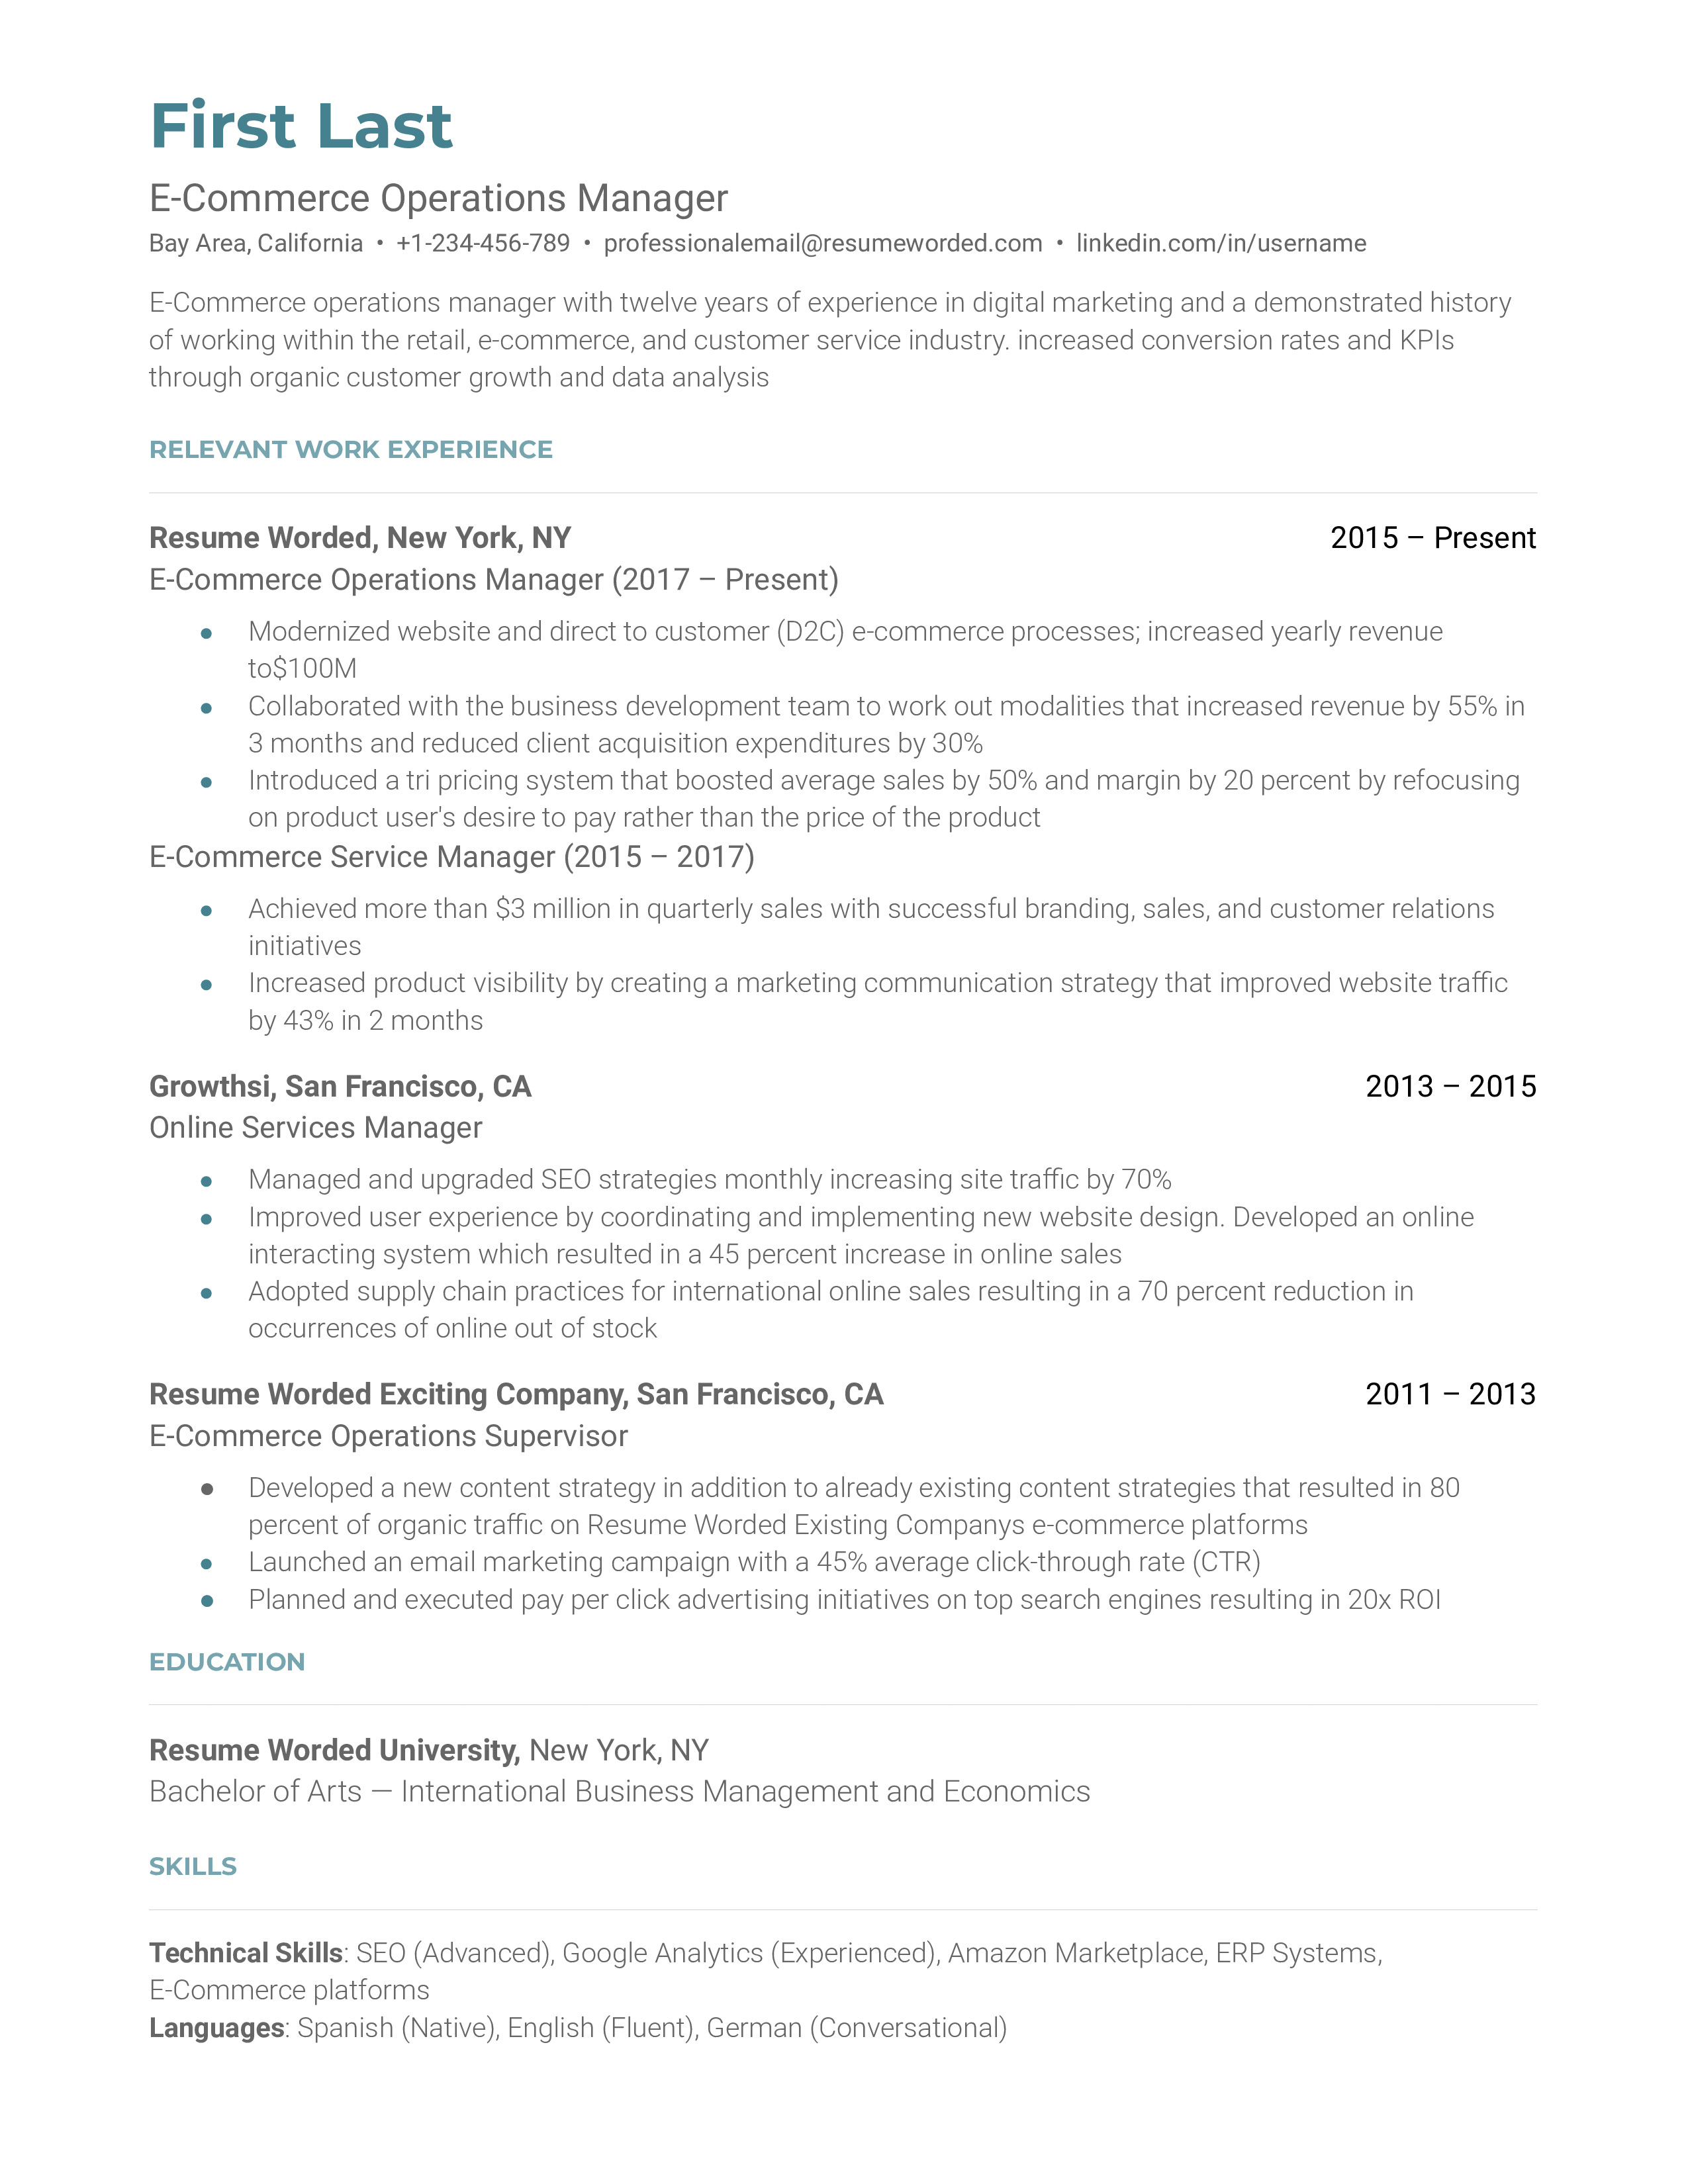 E-Commerce Operations Manager Resume Sample